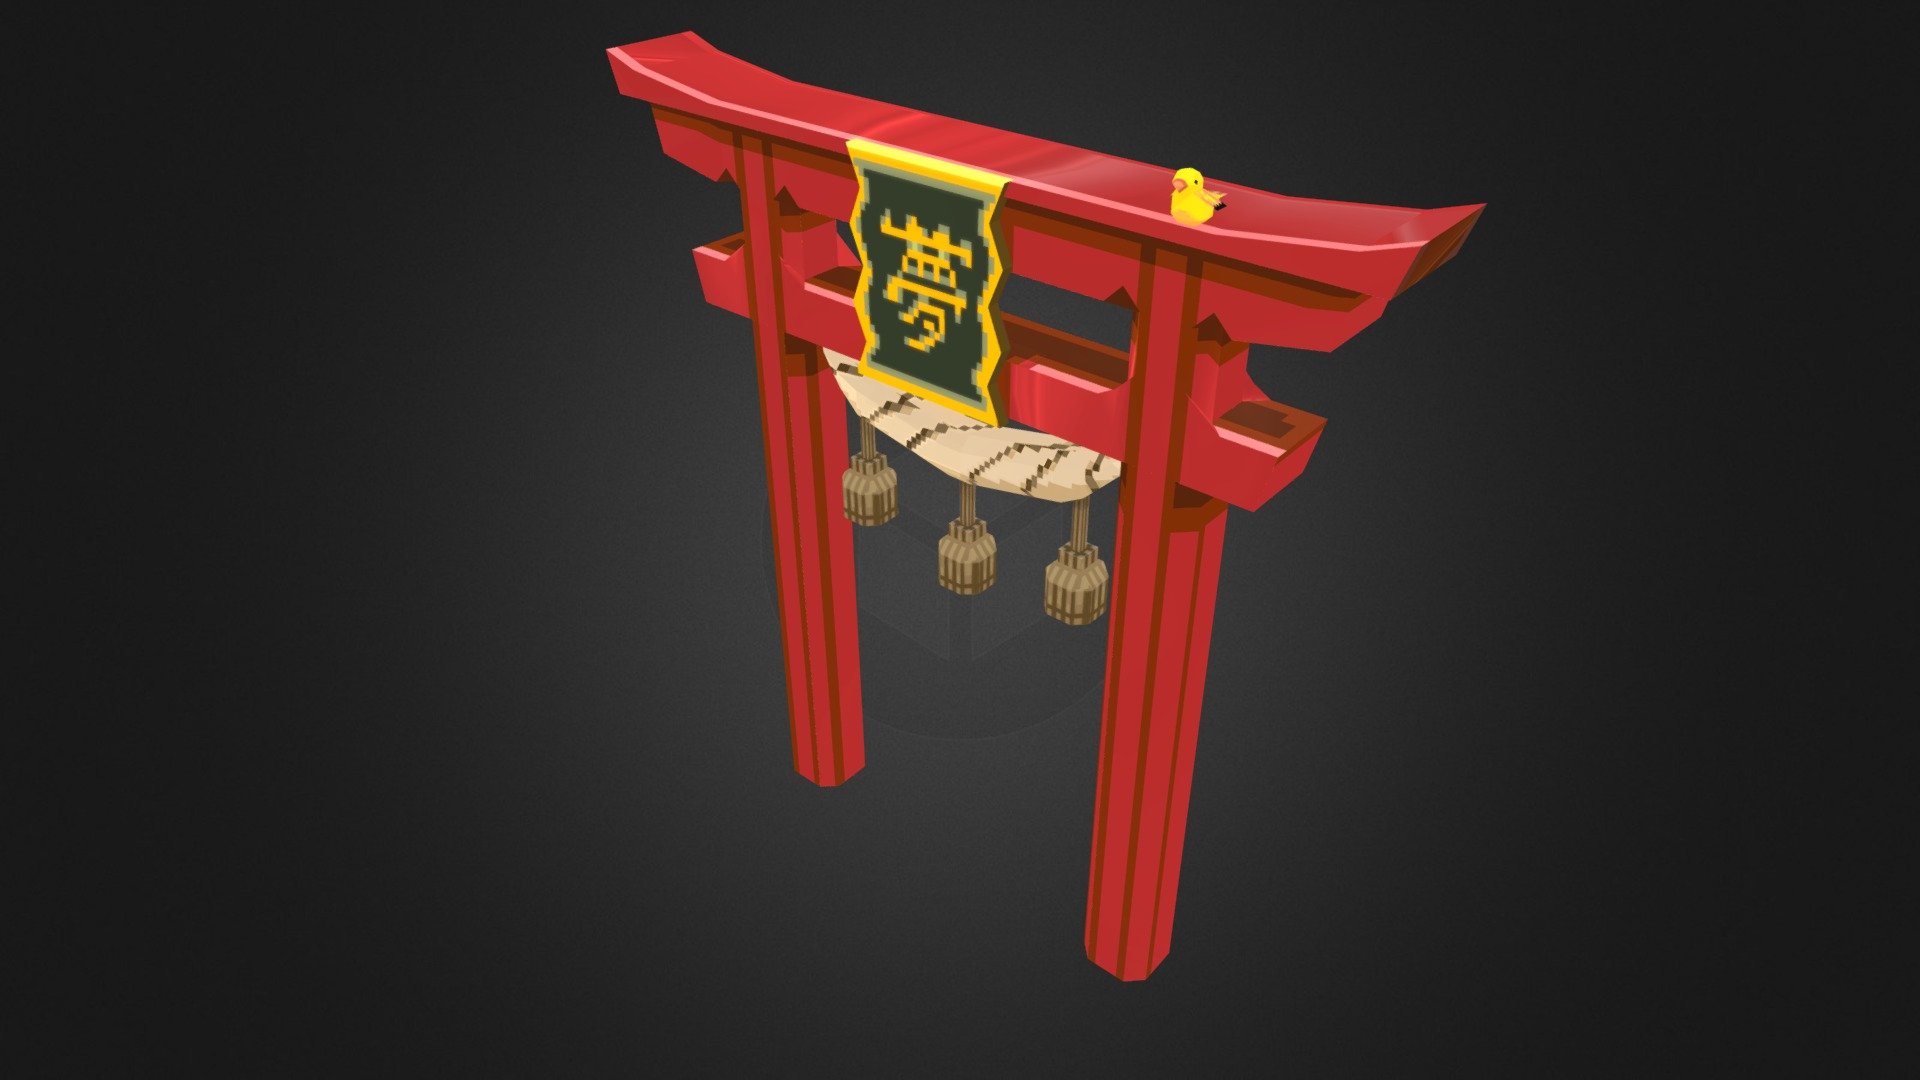 Japanese torii gate.
Trying my hand at mixing 3D modelling with pixel art textures - Torii Gate - 3D model by Boma (@SquirrelKidd) 3d model